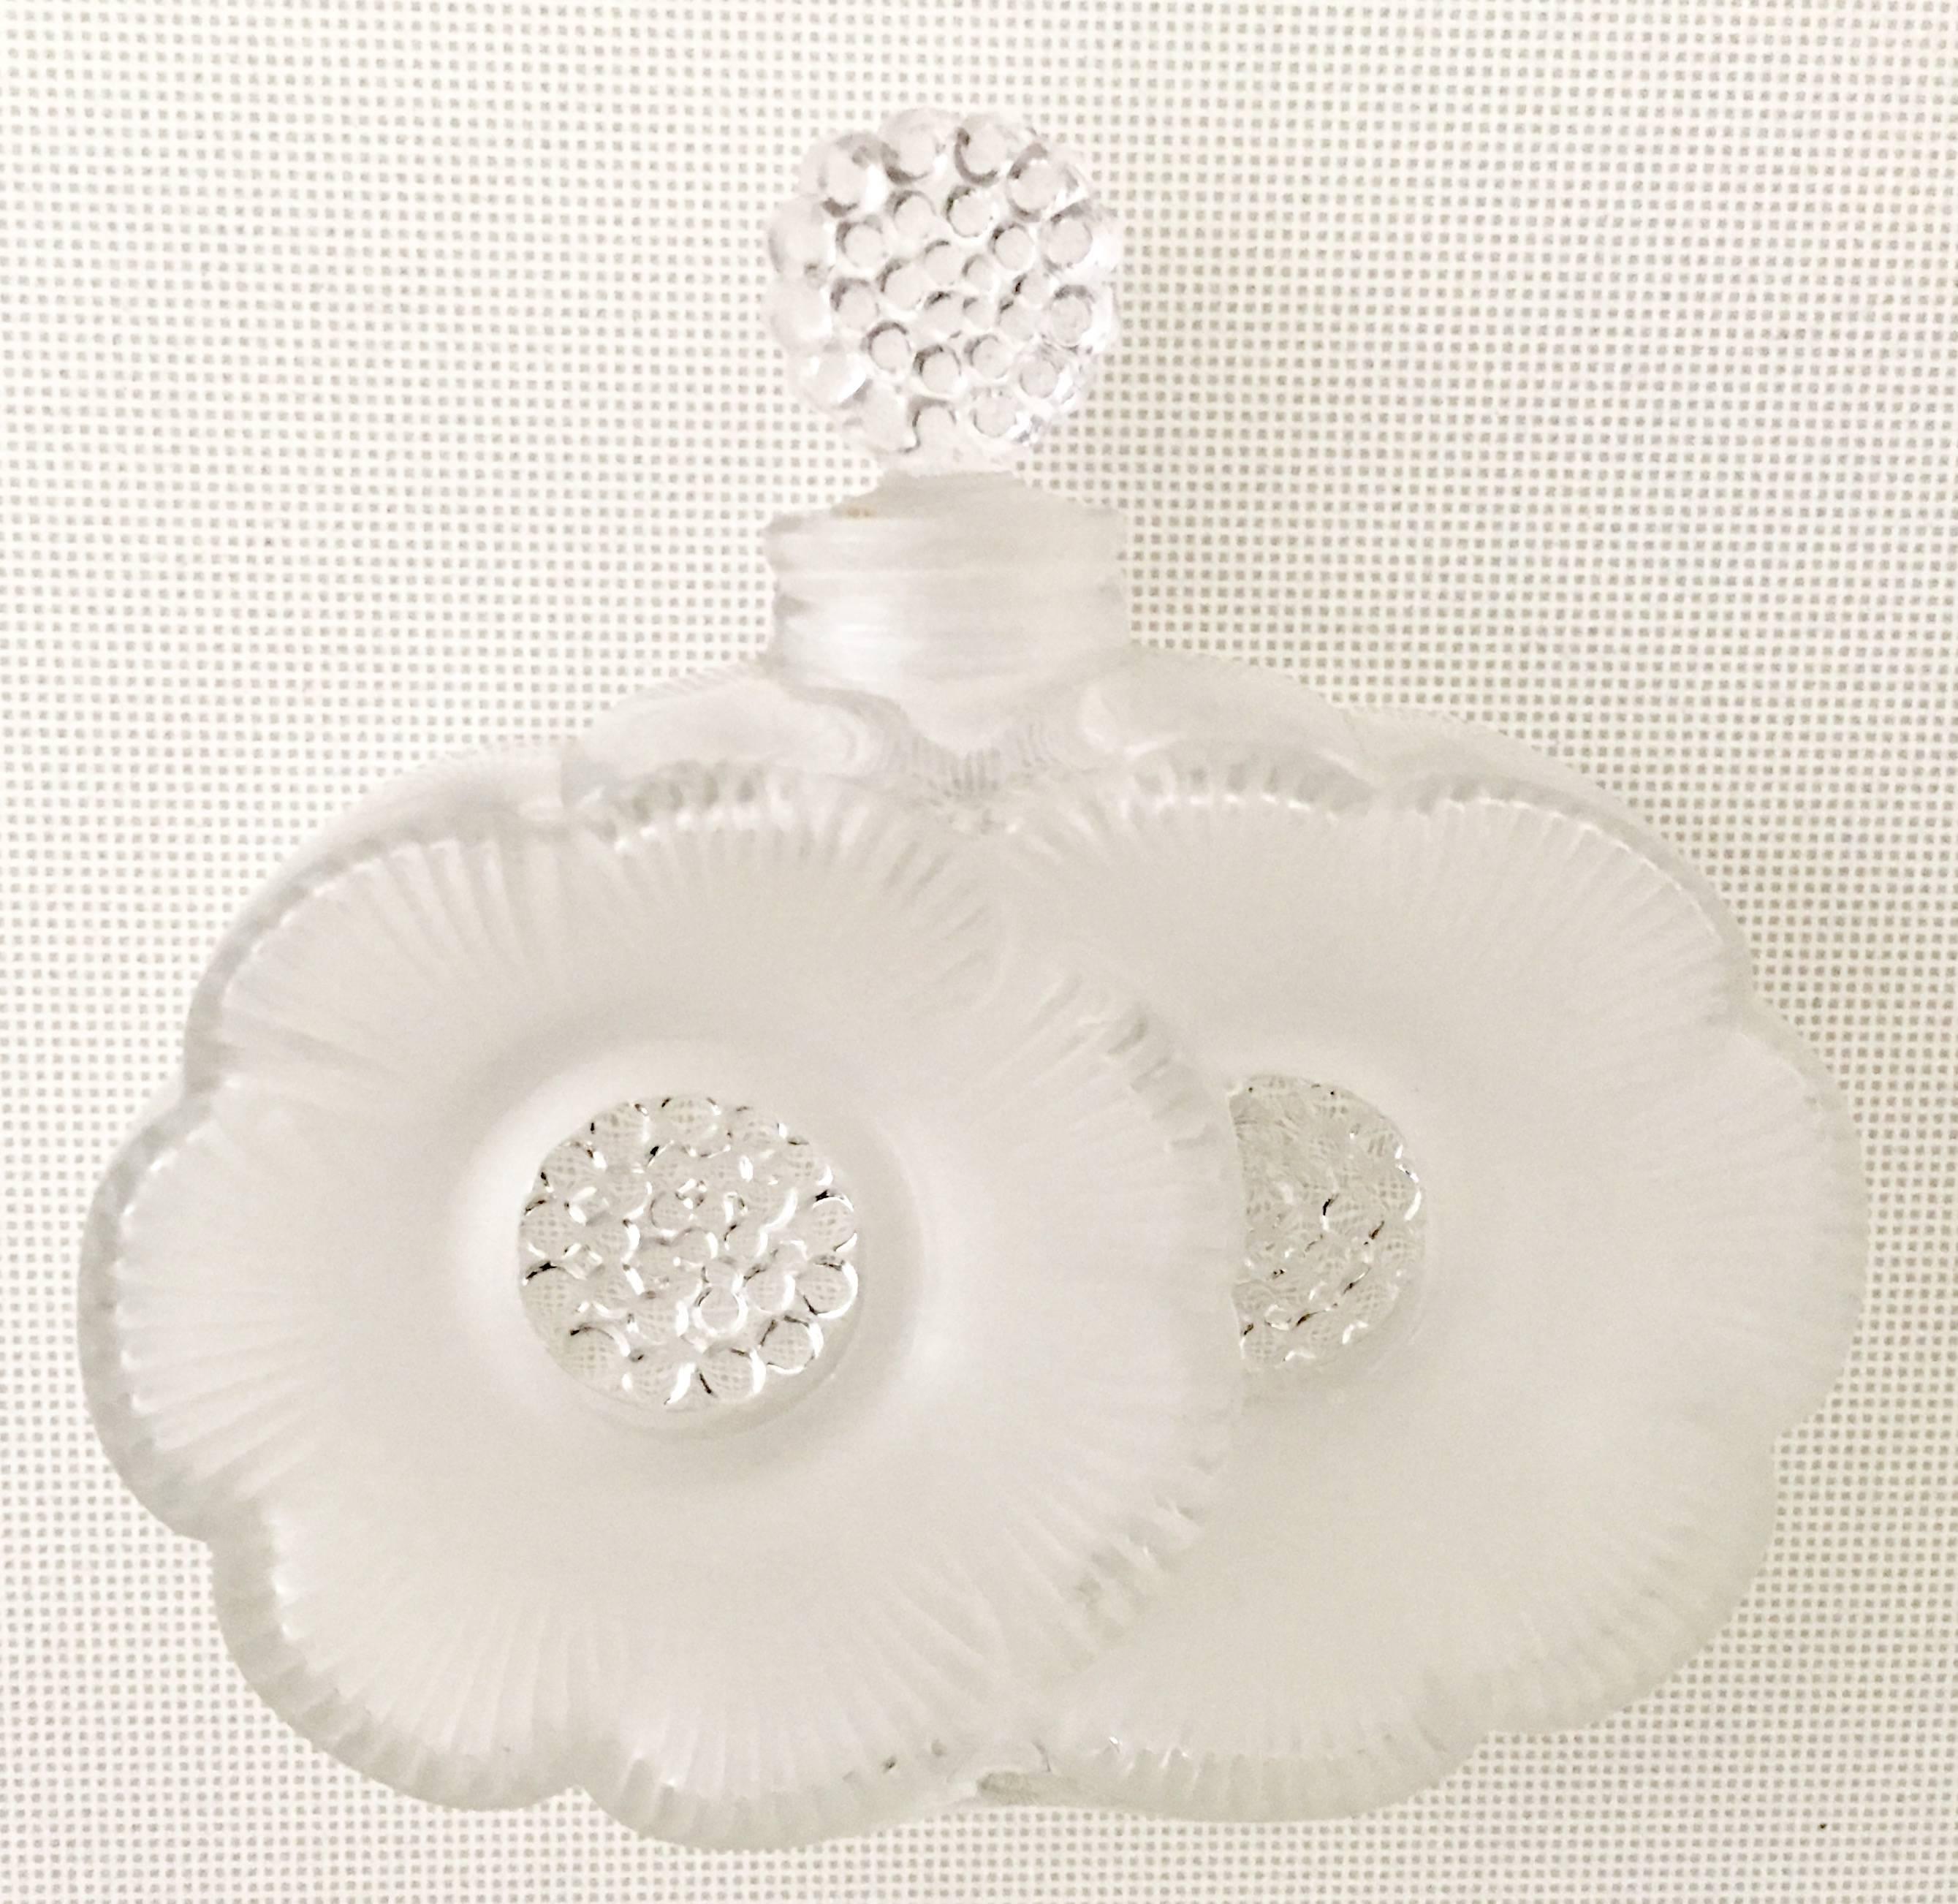 Lalique crystal frosted and clear double flower perfume decanter with stopper.
Signed on the underside, Lalique France.